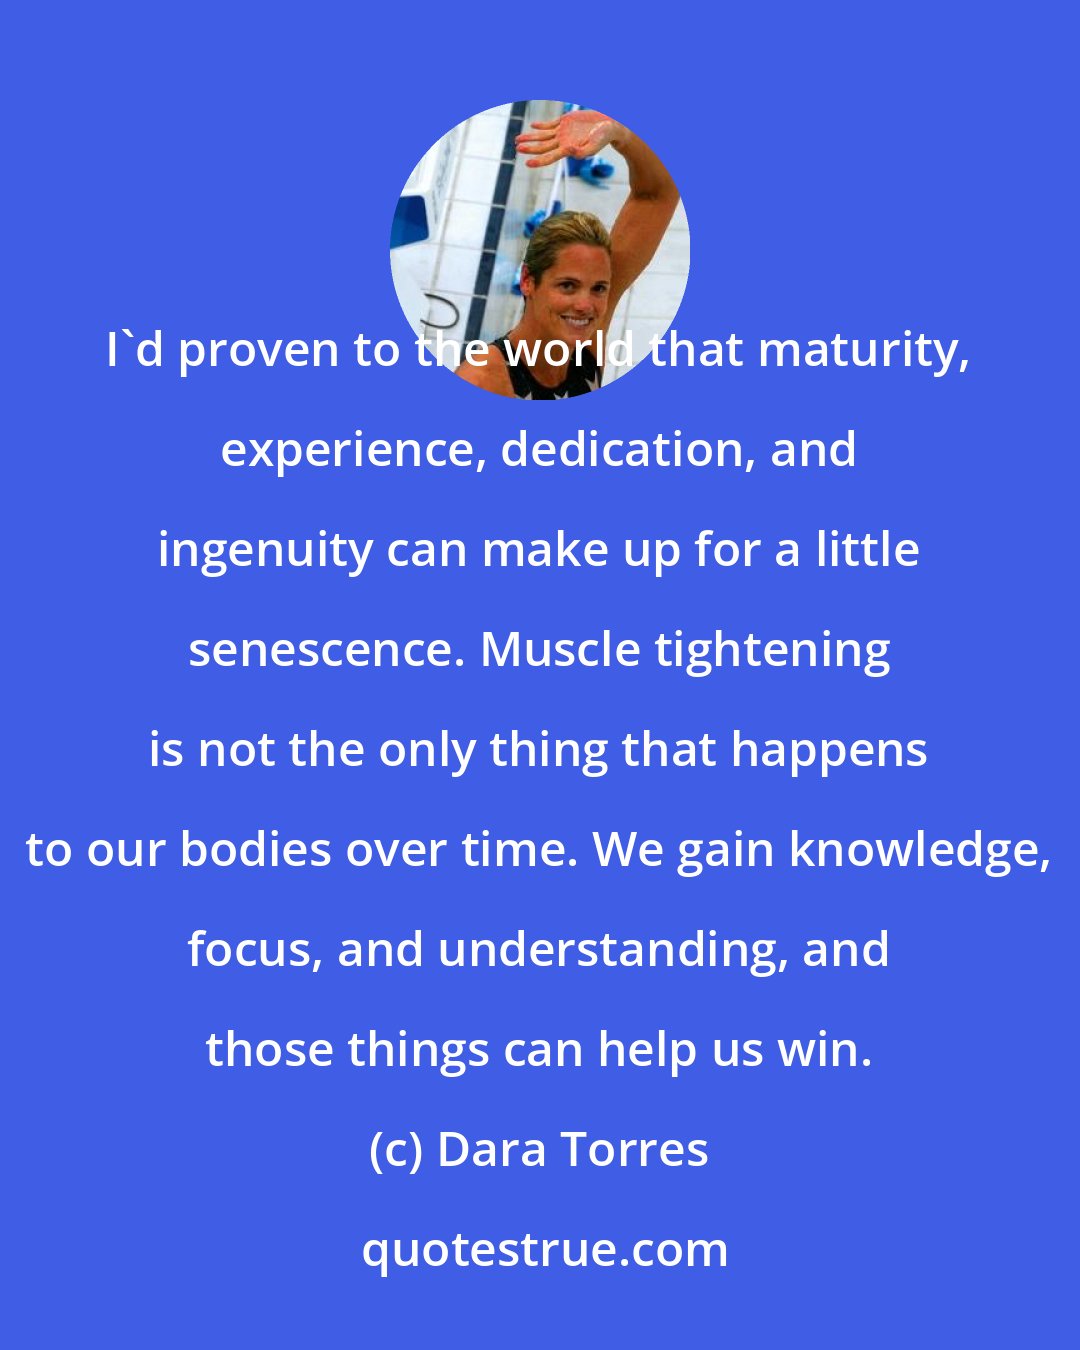 Dara Torres: I'd proven to the world that maturity, experience, dedication, and ingenuity can make up for a little senescence. Muscle tightening is not the only thing that happens to our bodies over time. We gain knowledge, focus, and understanding, and those things can help us win.